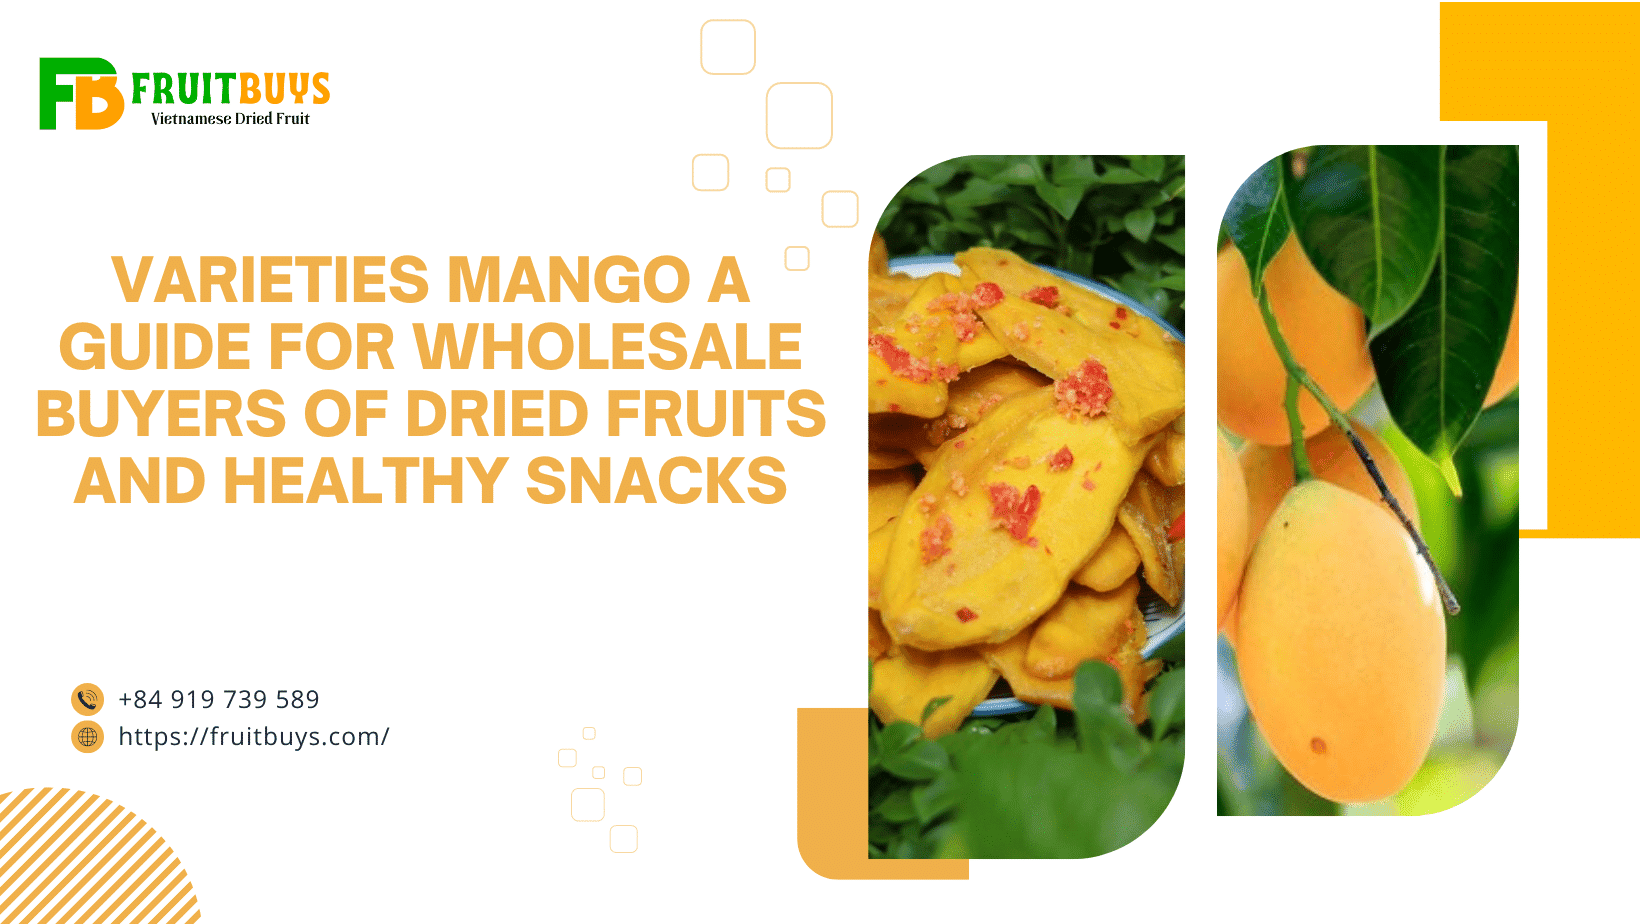 FruitBuys Vietnam  Varieties Mango A Guide For Wholesale Buyers Of Dried Fruits And Healthy Snacks